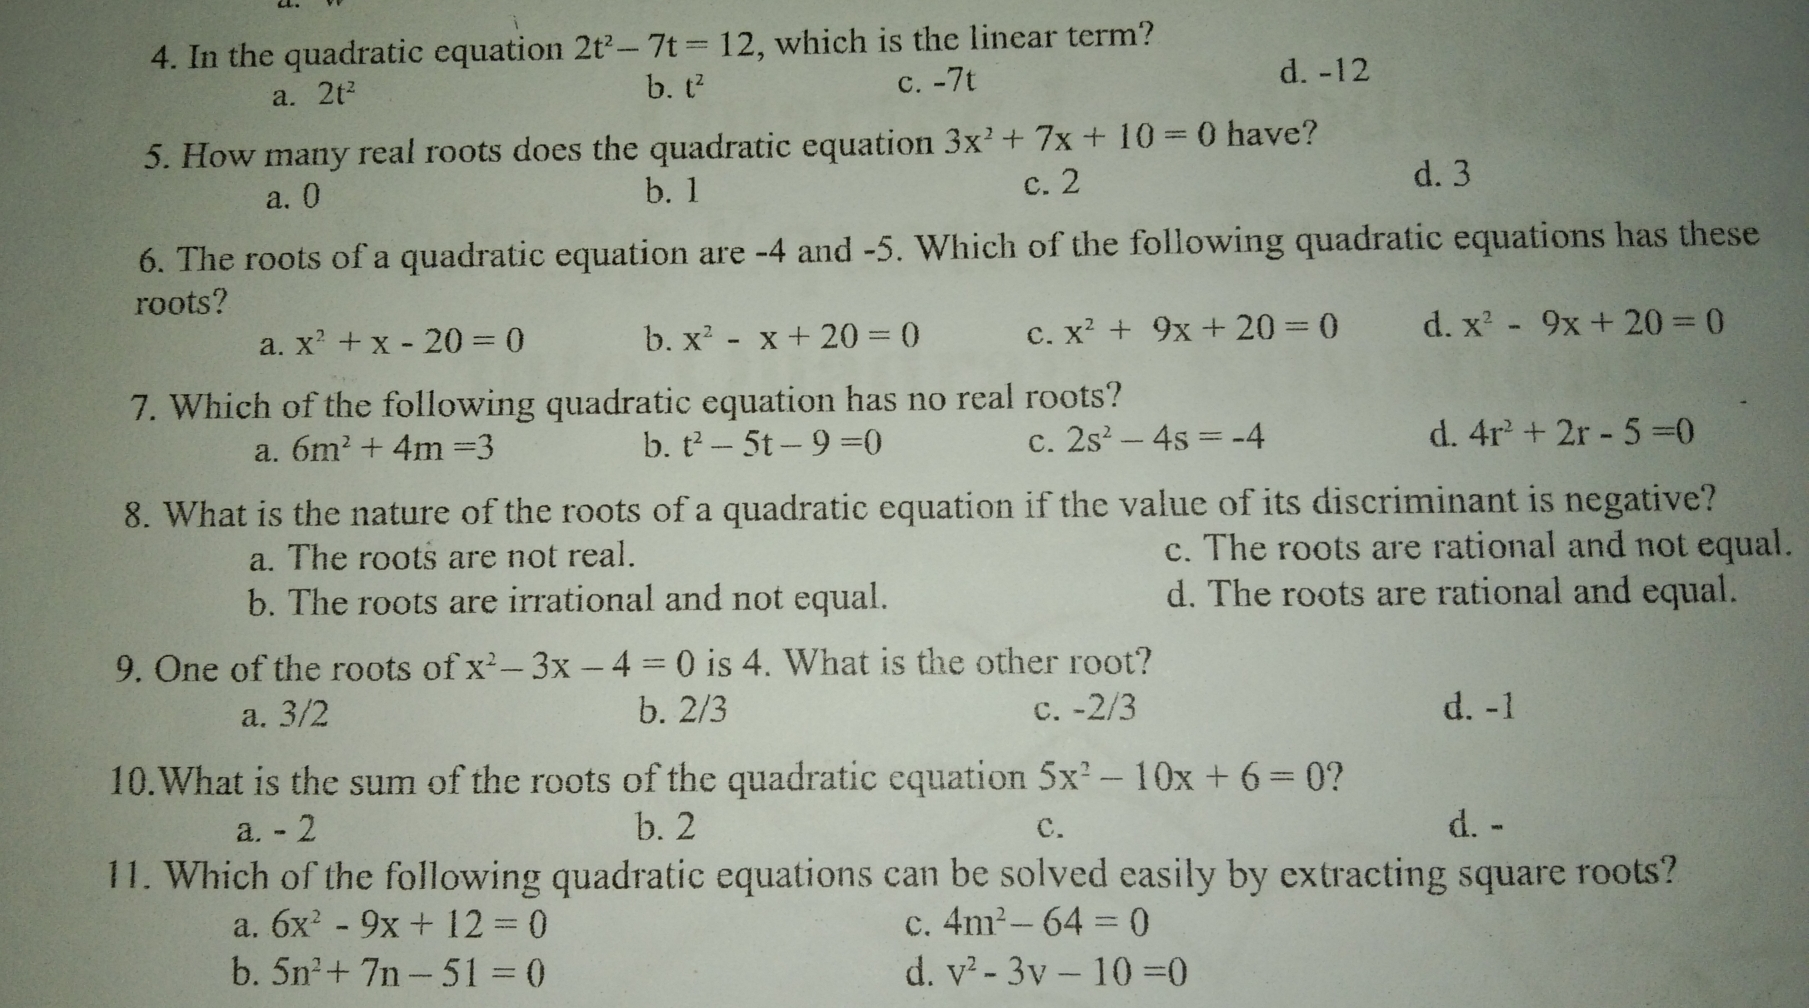 4. In the quadratic equation 2t2-7t=12 , which is the linear term? a. 2t2 b. t2 c.-7t d. -12 5. How many real roots does the quadratic equation 3x2+7x+10=0 have? a.0 b. 1 c. 2 d. 3 6. The roots of a quadratic equation are -4 and -5. Which of the following quadratic equations has these roots? a. x2+x-20=0 b. x2-x+20=0 C. x2+9x+20=0 d. x2-9x+20=0 7. Which of the following quadratic equation has no real roots? a. 6m2+4m=3 b. t2-5t-9=0 C. 2s2-4s=-4 d. 4r2+2r-5=0 8. What is the nature of the roots of a quadratic equation if the value of its discriminant is negative? a. The roots are not real. c. The roots are rational and not equal. b. The roots are irrational and not equal. d. The roots are rational and equal. 9. One of the roots of x2-3x-4=0 is 4. What is the other root? a.3/2 b. 2/3 c. -2/3 d. -1 10.What is the sum of the roots of the quadratic equation 5x2-10x+6=0 ? a. - 2 b. 2 c. d. - 11. Which of the following quadratic equations can be solved easily by extracting square roots? a. 6x2-9x+12=0 c. 4m2-64=0 b. 5n2+7n-51=0 d. v2-3v-10=0